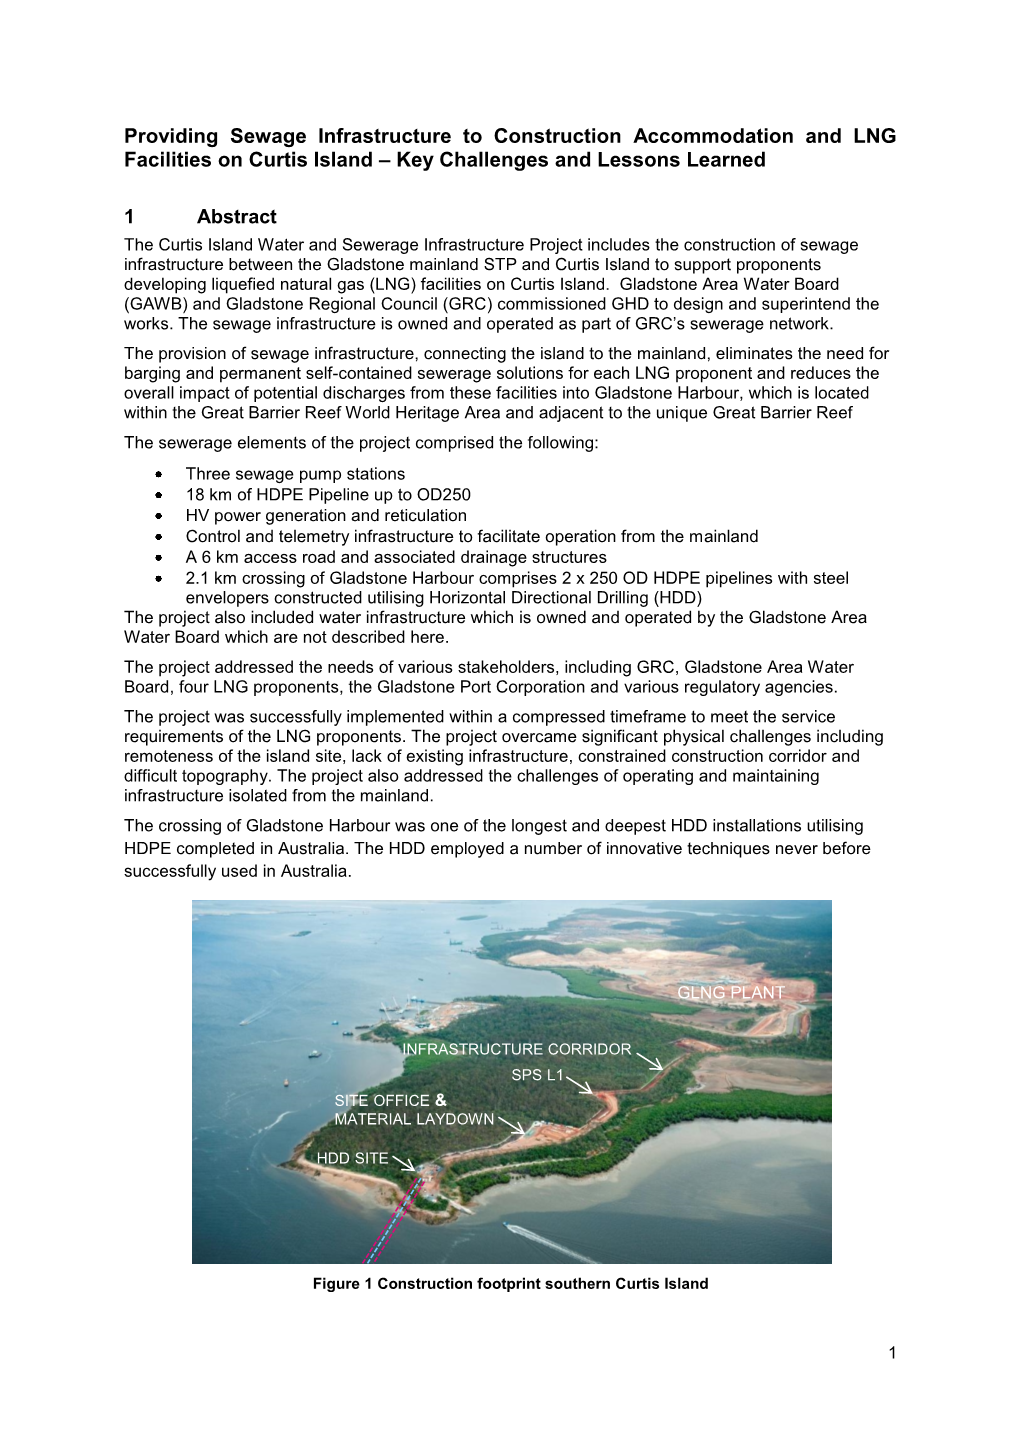 Providing Sewage Infrastructure to Construction Accommodation and LNG Facilities on Curtis Island – Key Challenges and Lessons Learned